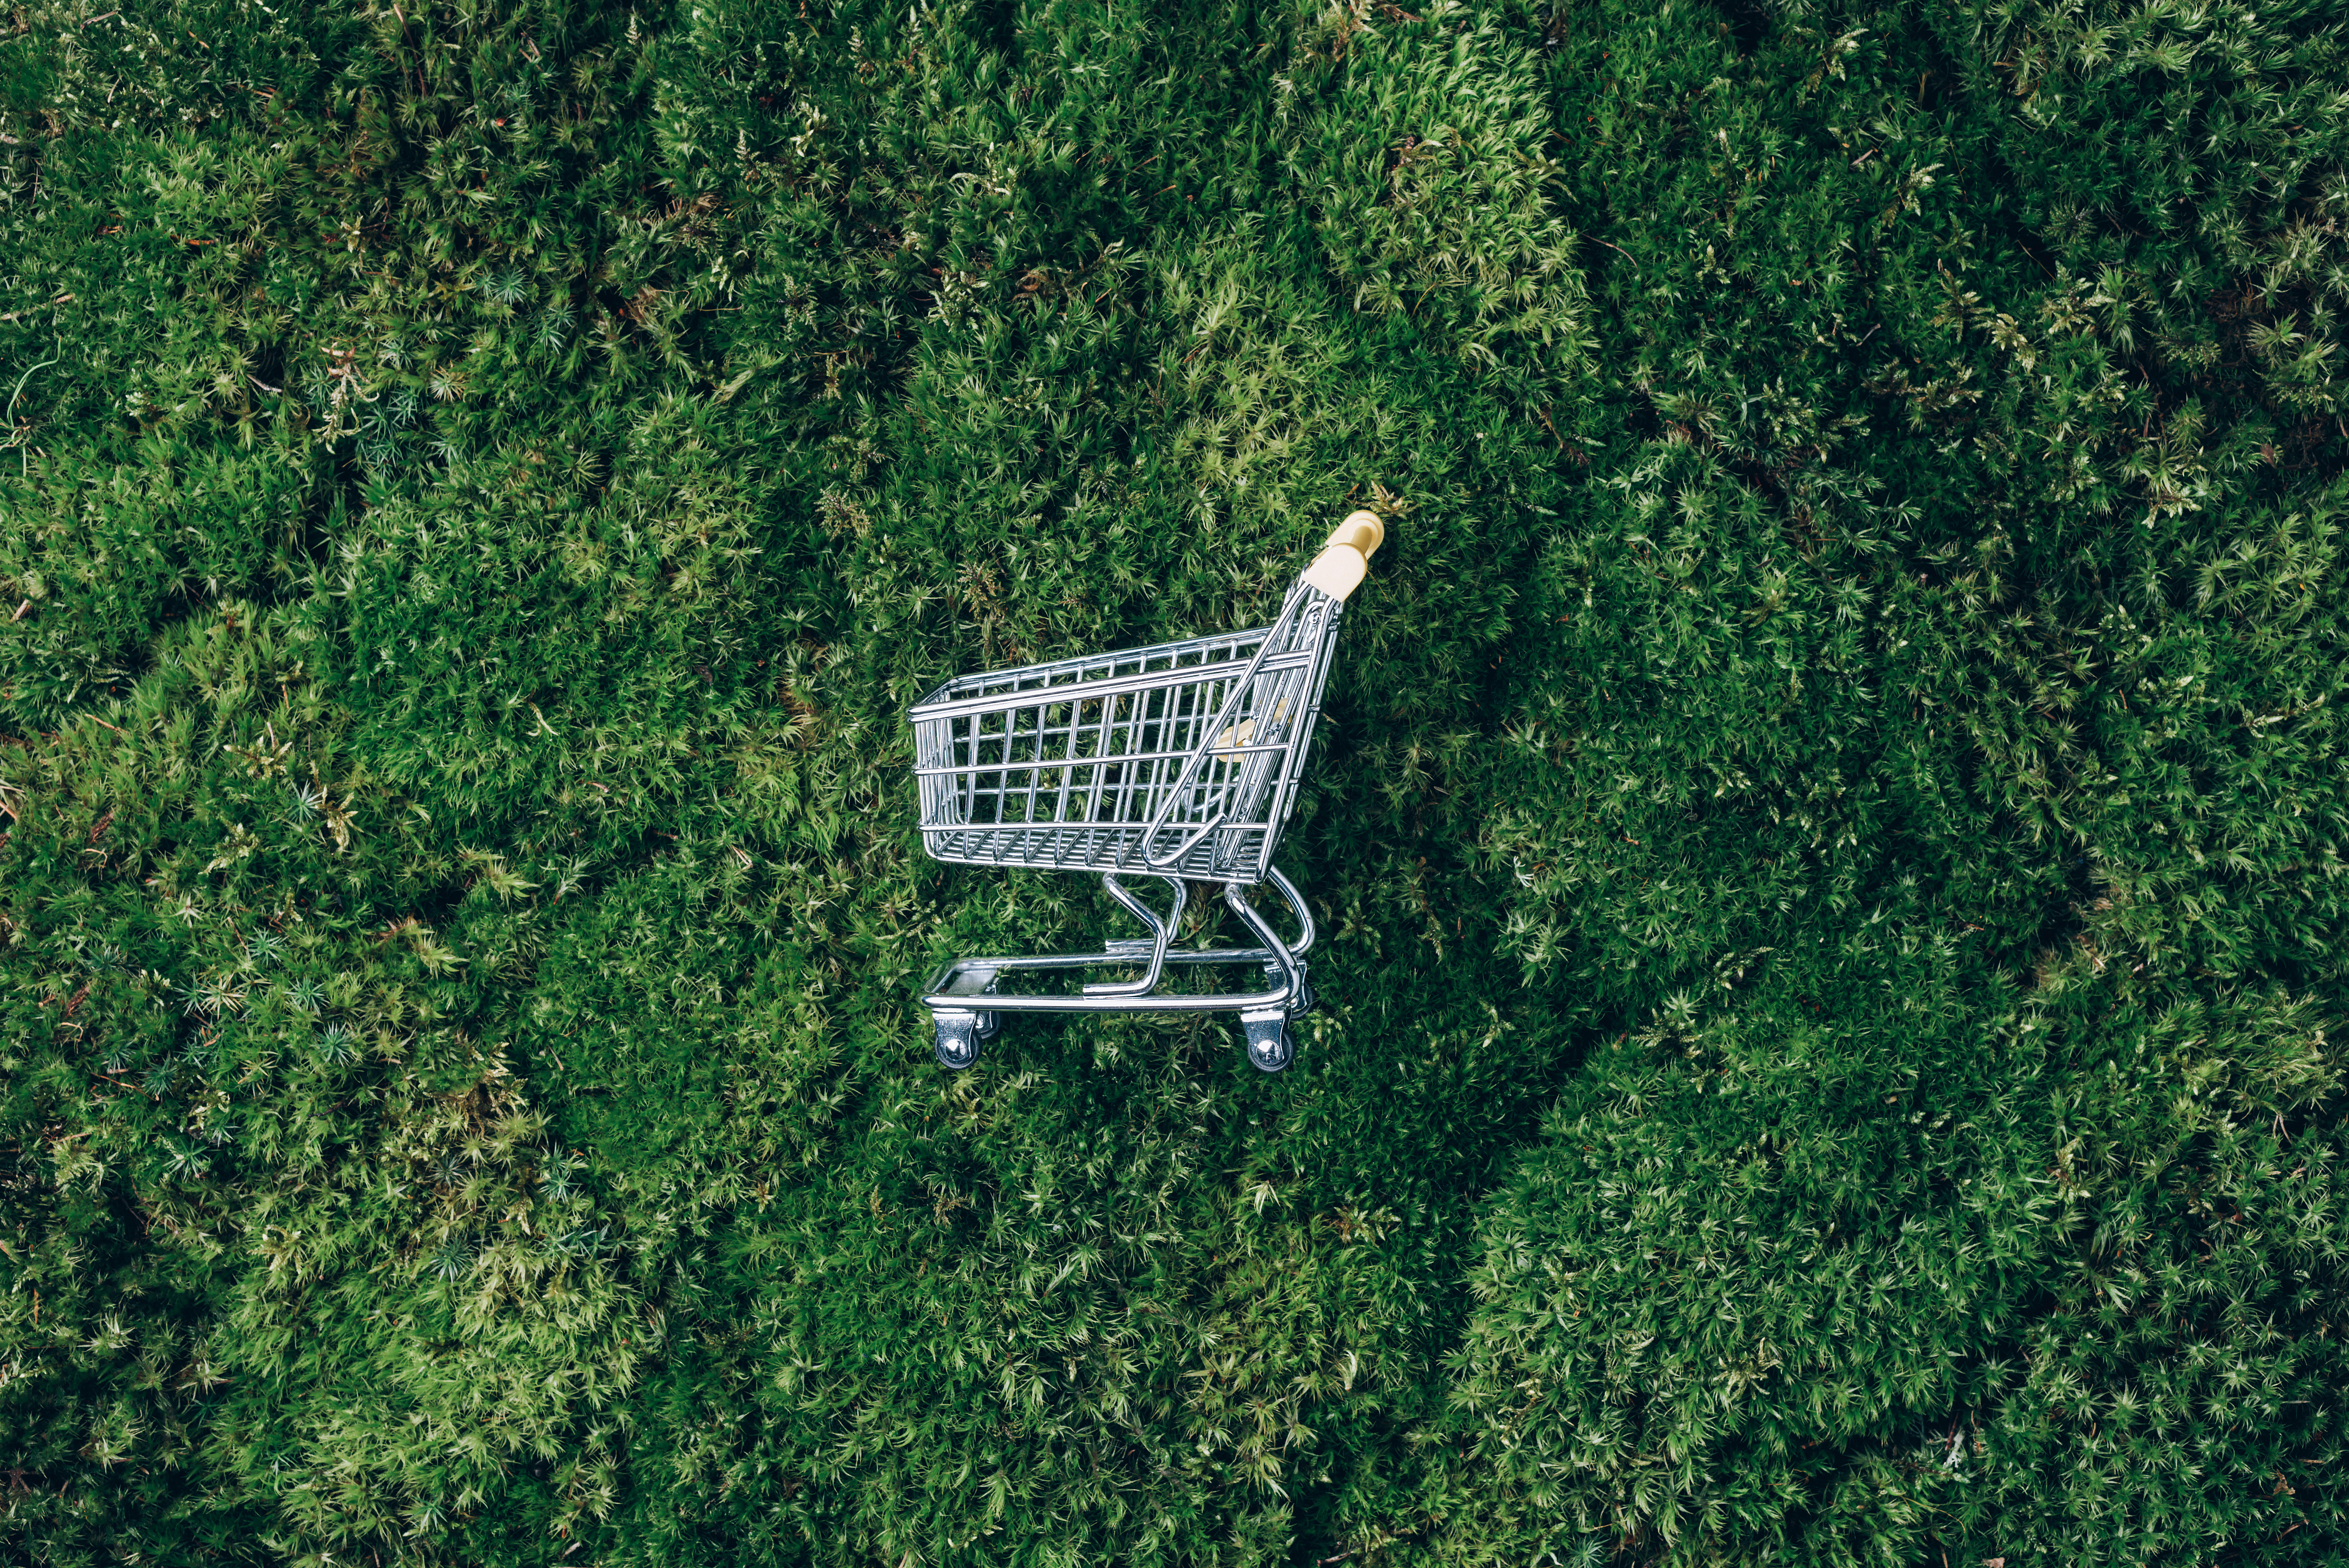 a shopping cart laying on a grass field